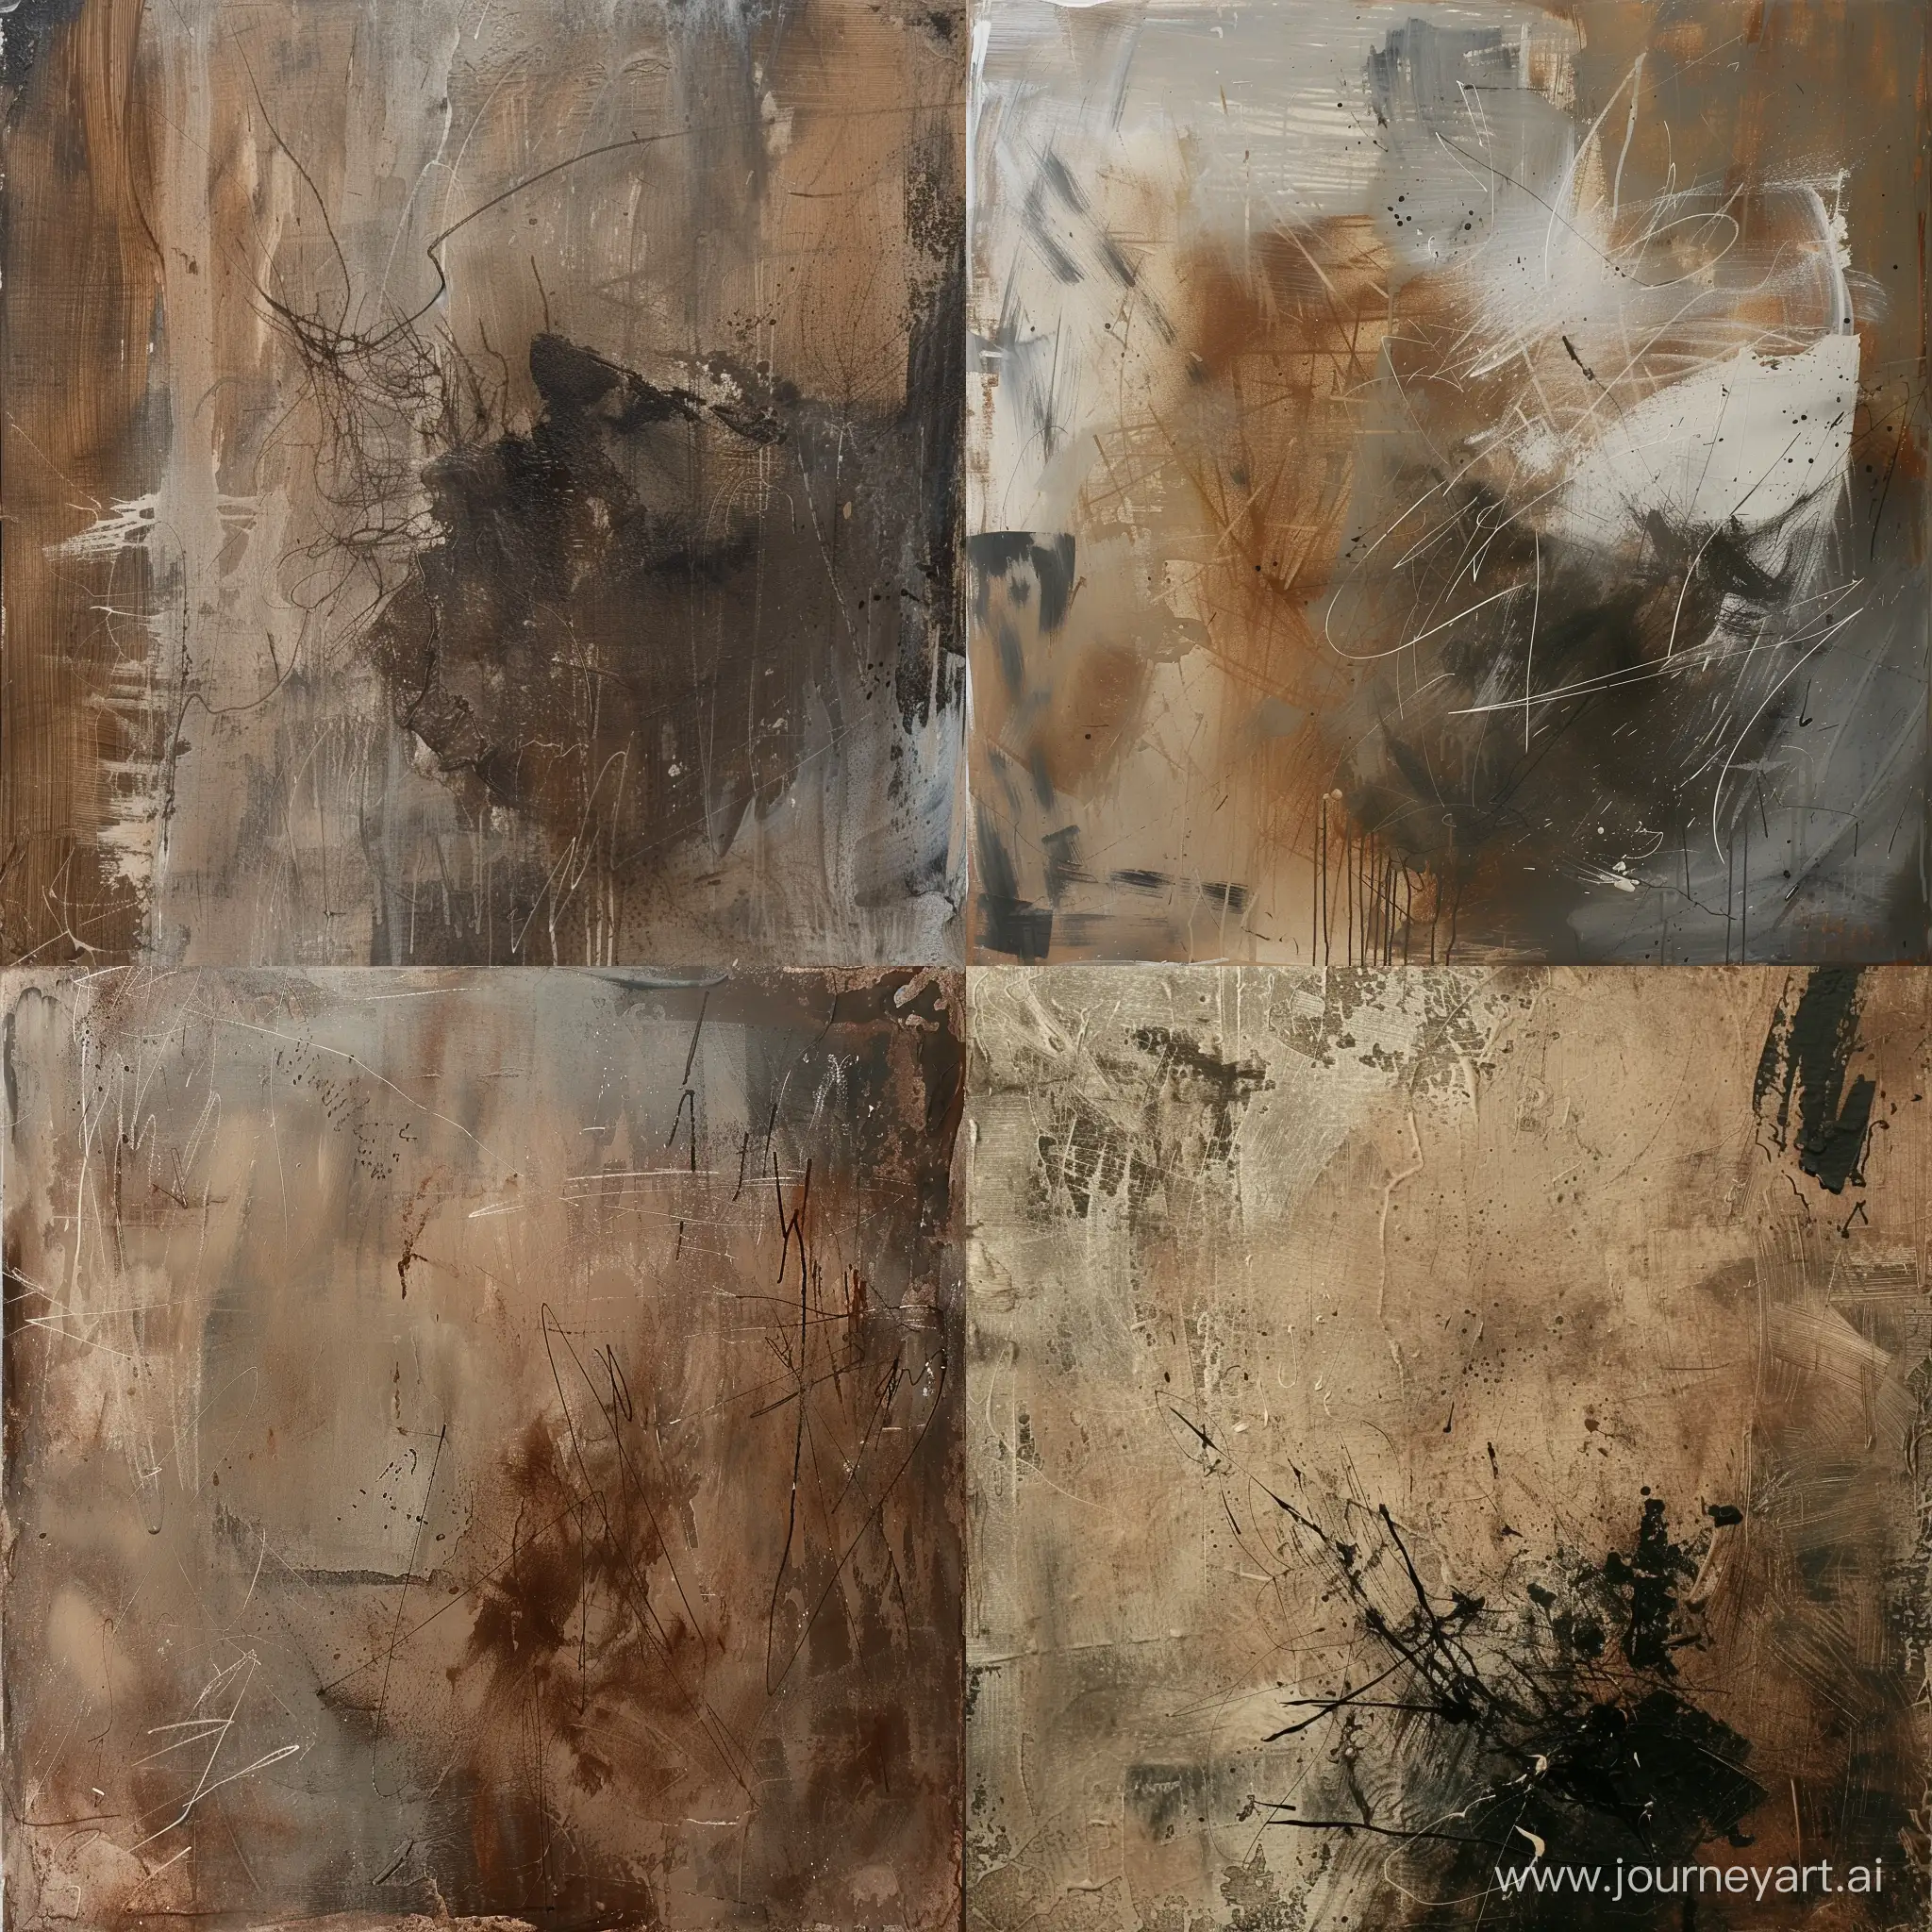 Transgressive-Abstract-Painting-Brown-and-Grey-Tones-with-Visible-Brush-Strokes